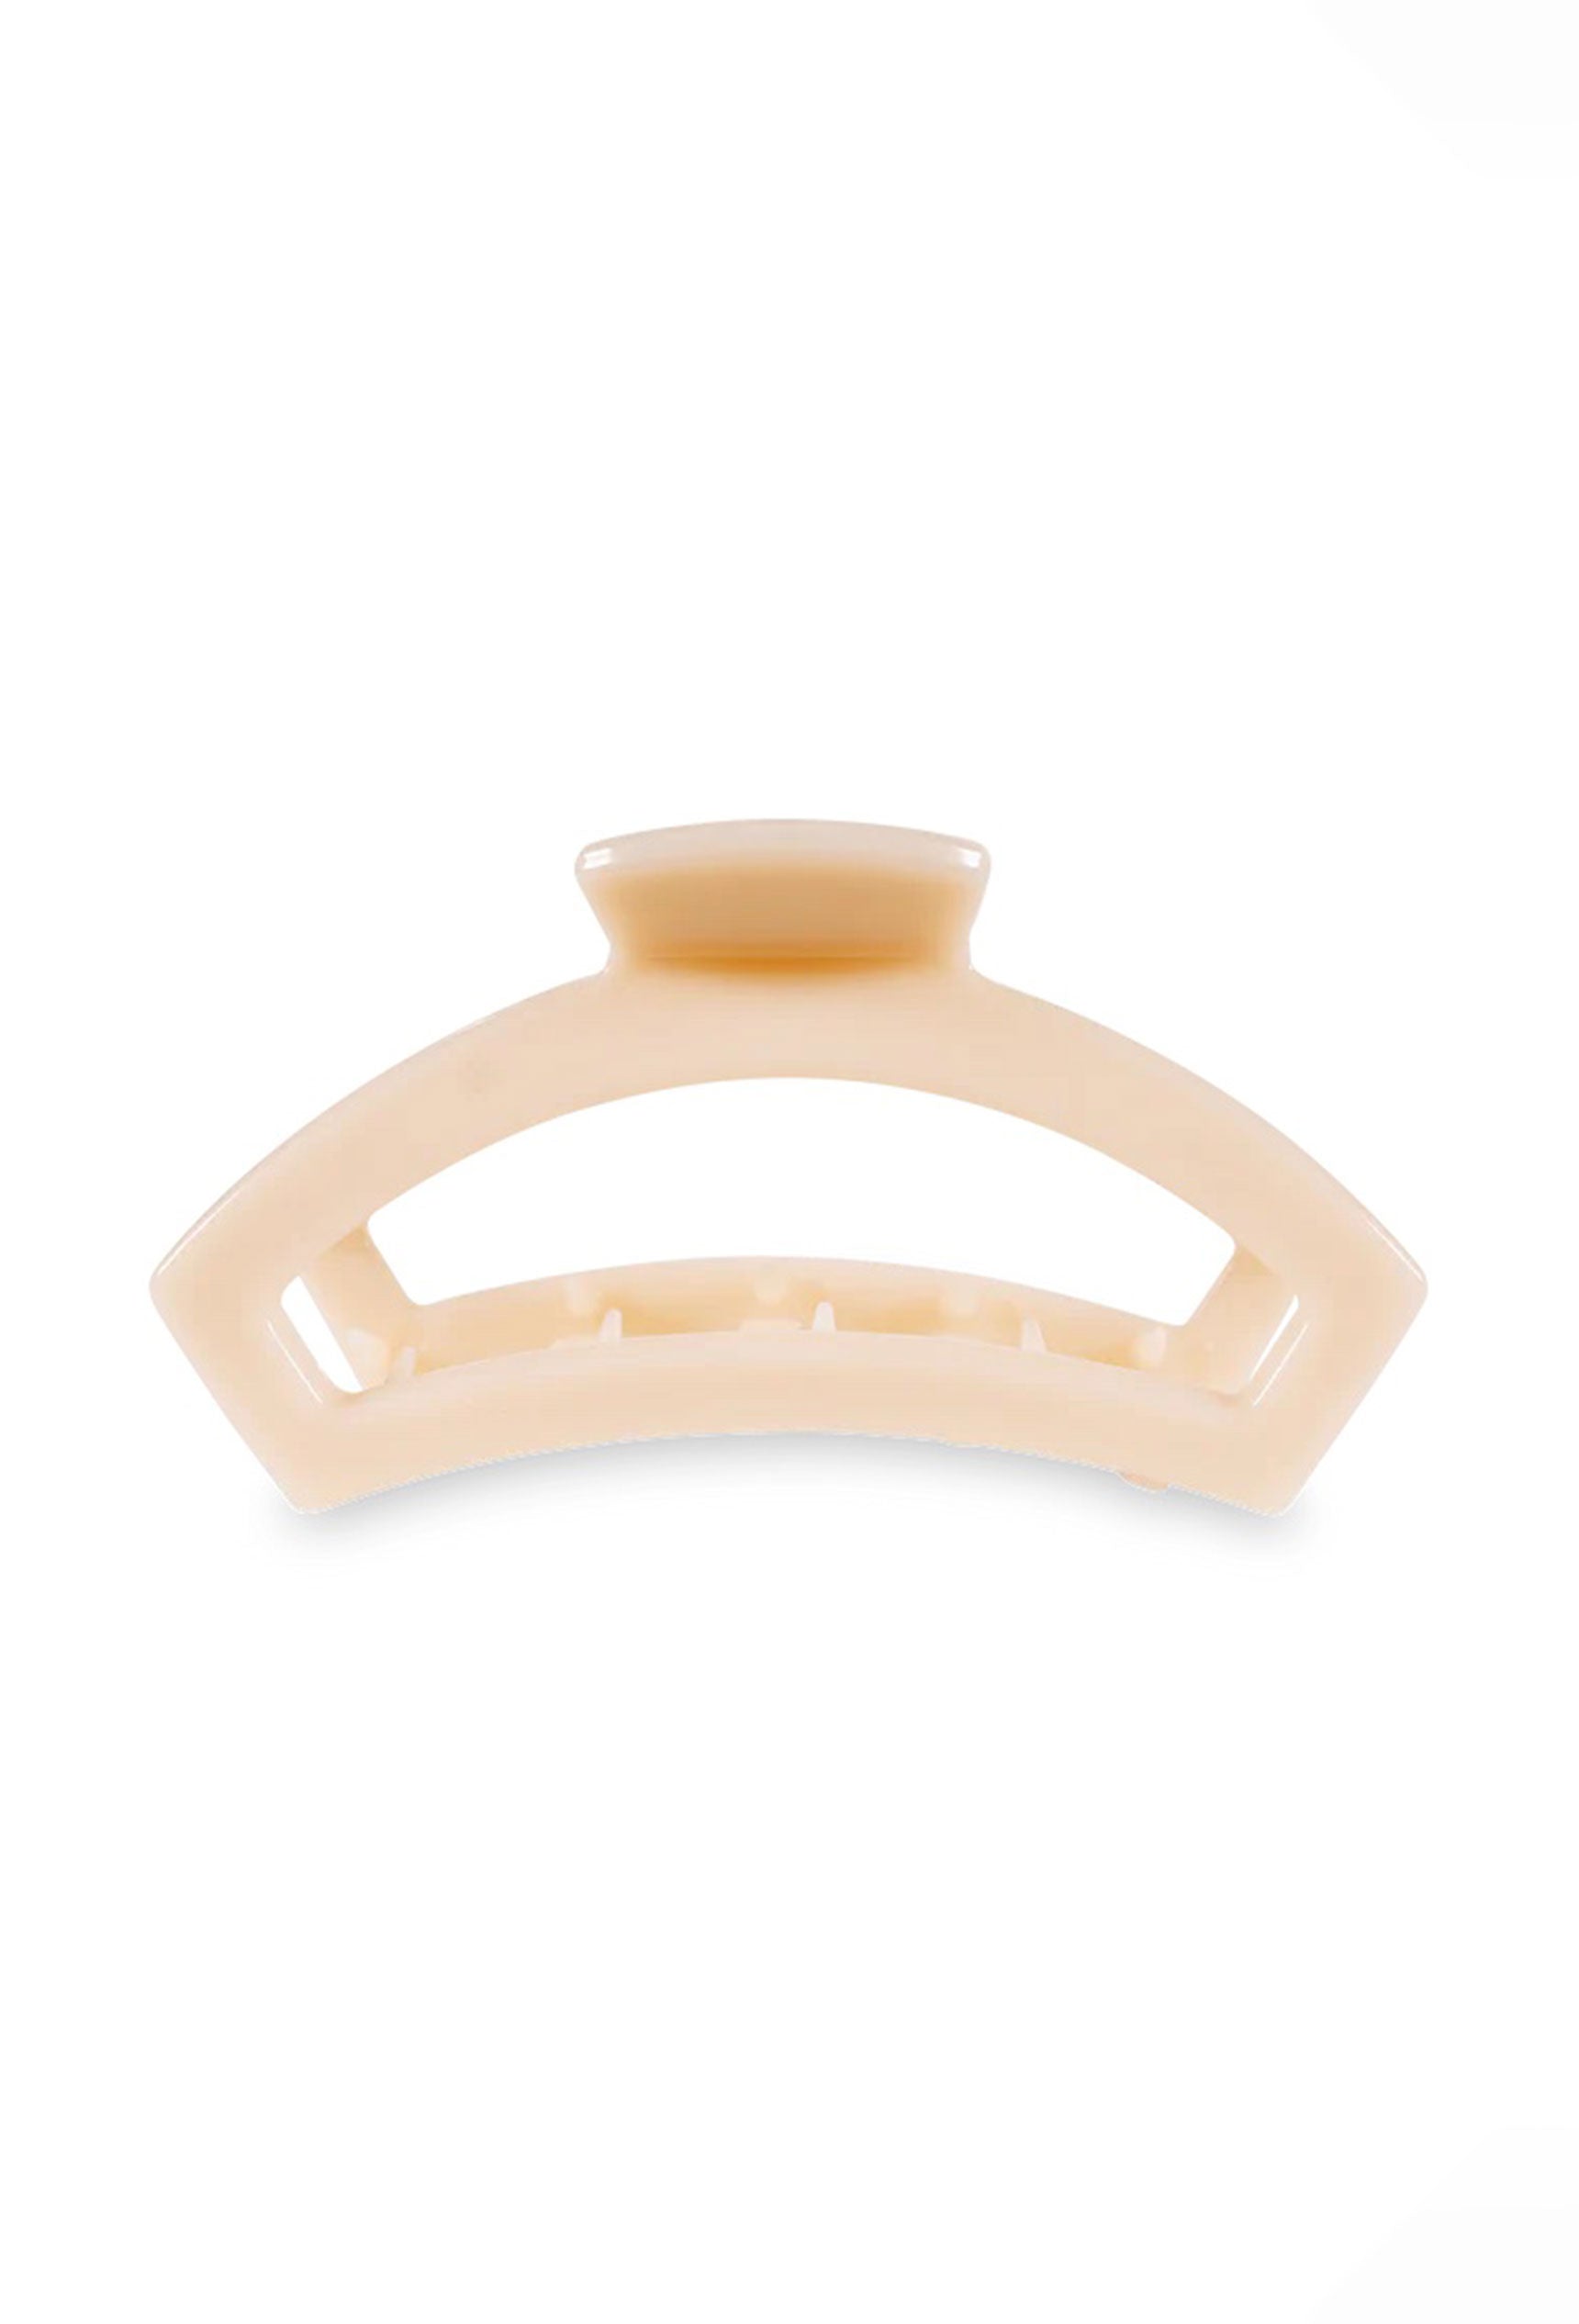 Claw clip that has bendable teeth that take back to shape, they work on all hair types and have a strong hold